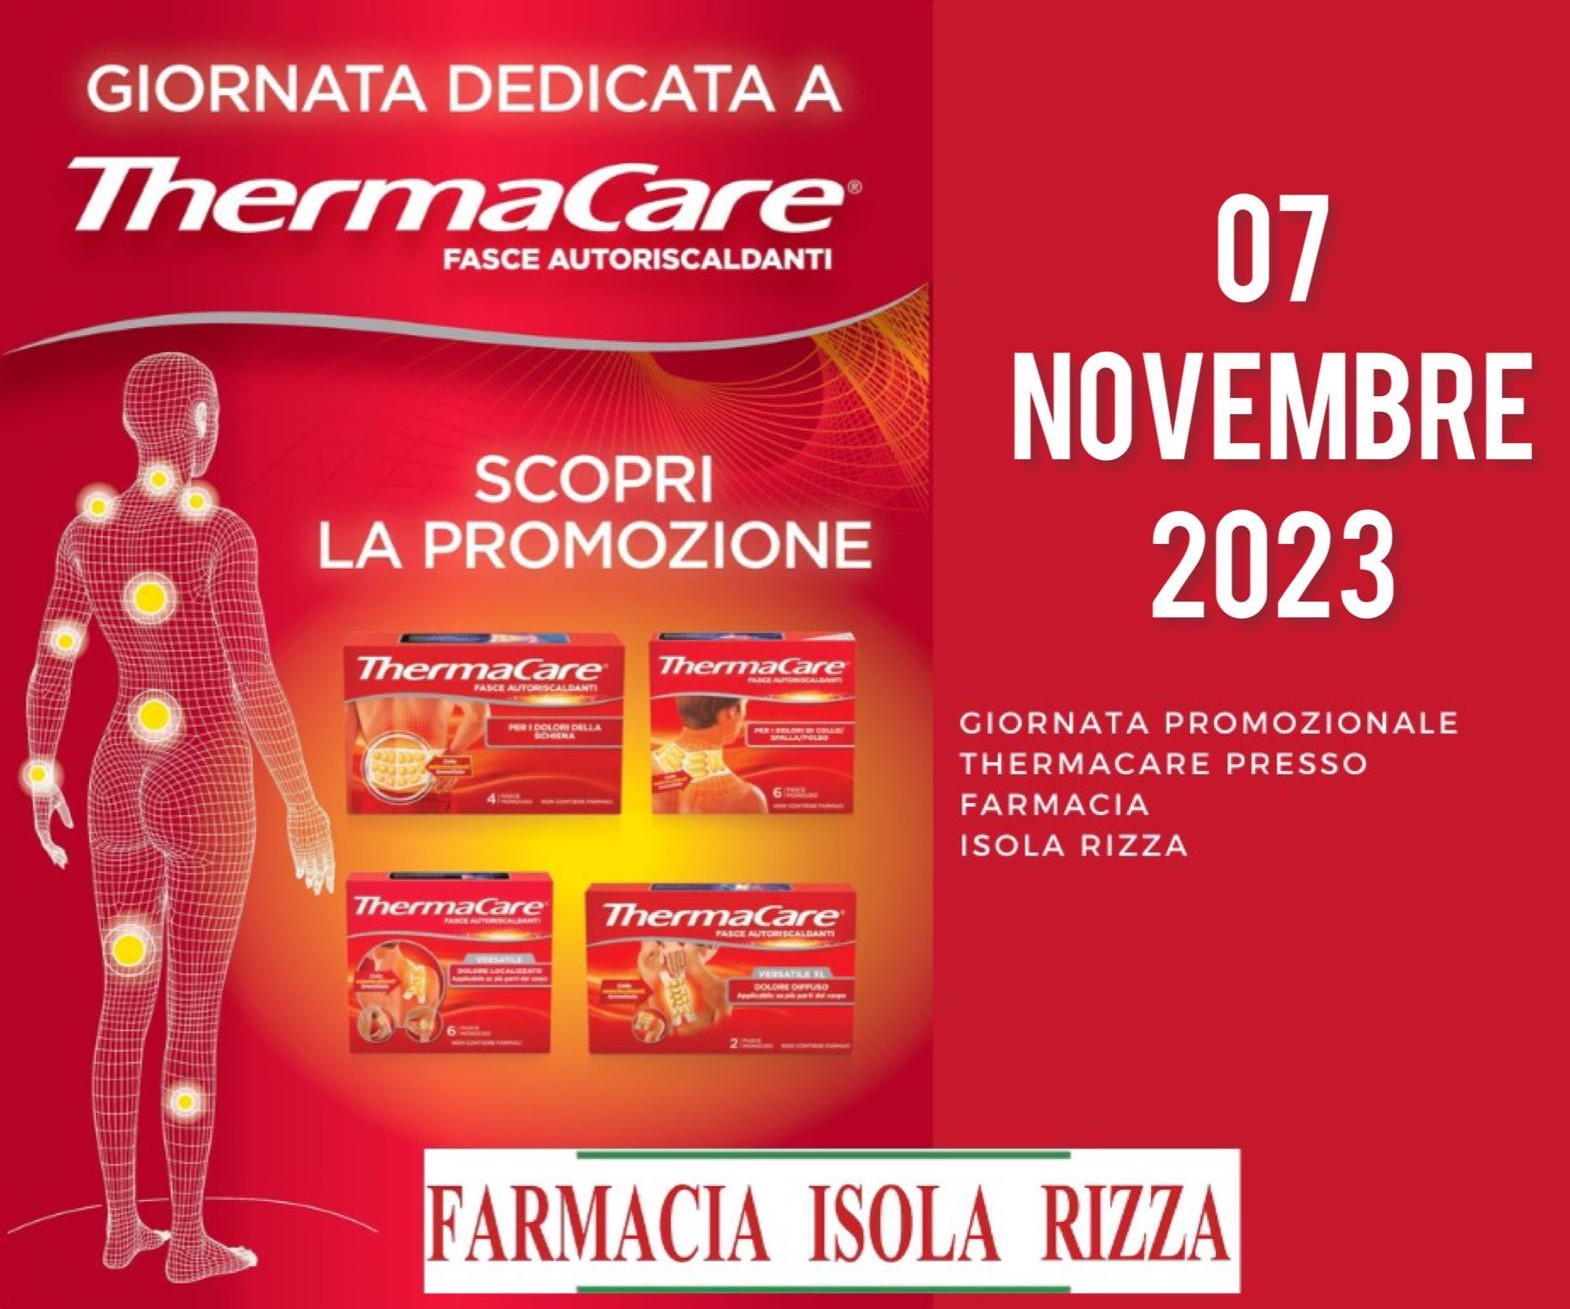 https://www.farmaciaisolarizza.it/wp-content/uploads/thermacare-2023-1.jpg